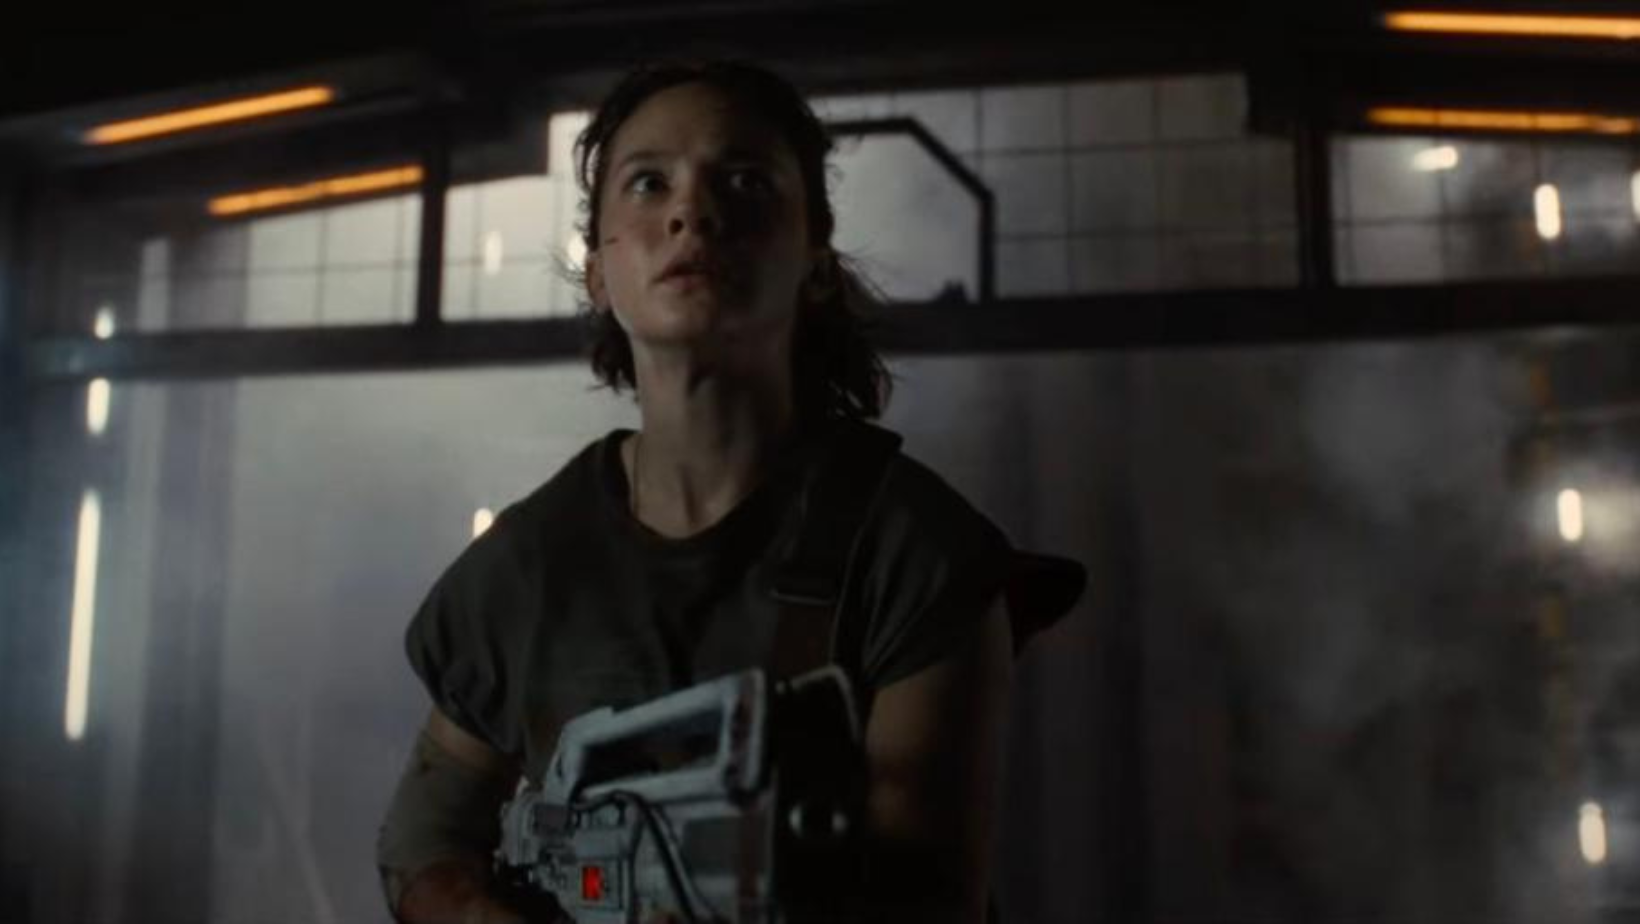 Alien Romulus Trailer Brings Back the Franchise with Facehuggers and More Horror; Fede Alvarez, the Director, Wanted to Bring Back the Handmade Roots of the Series